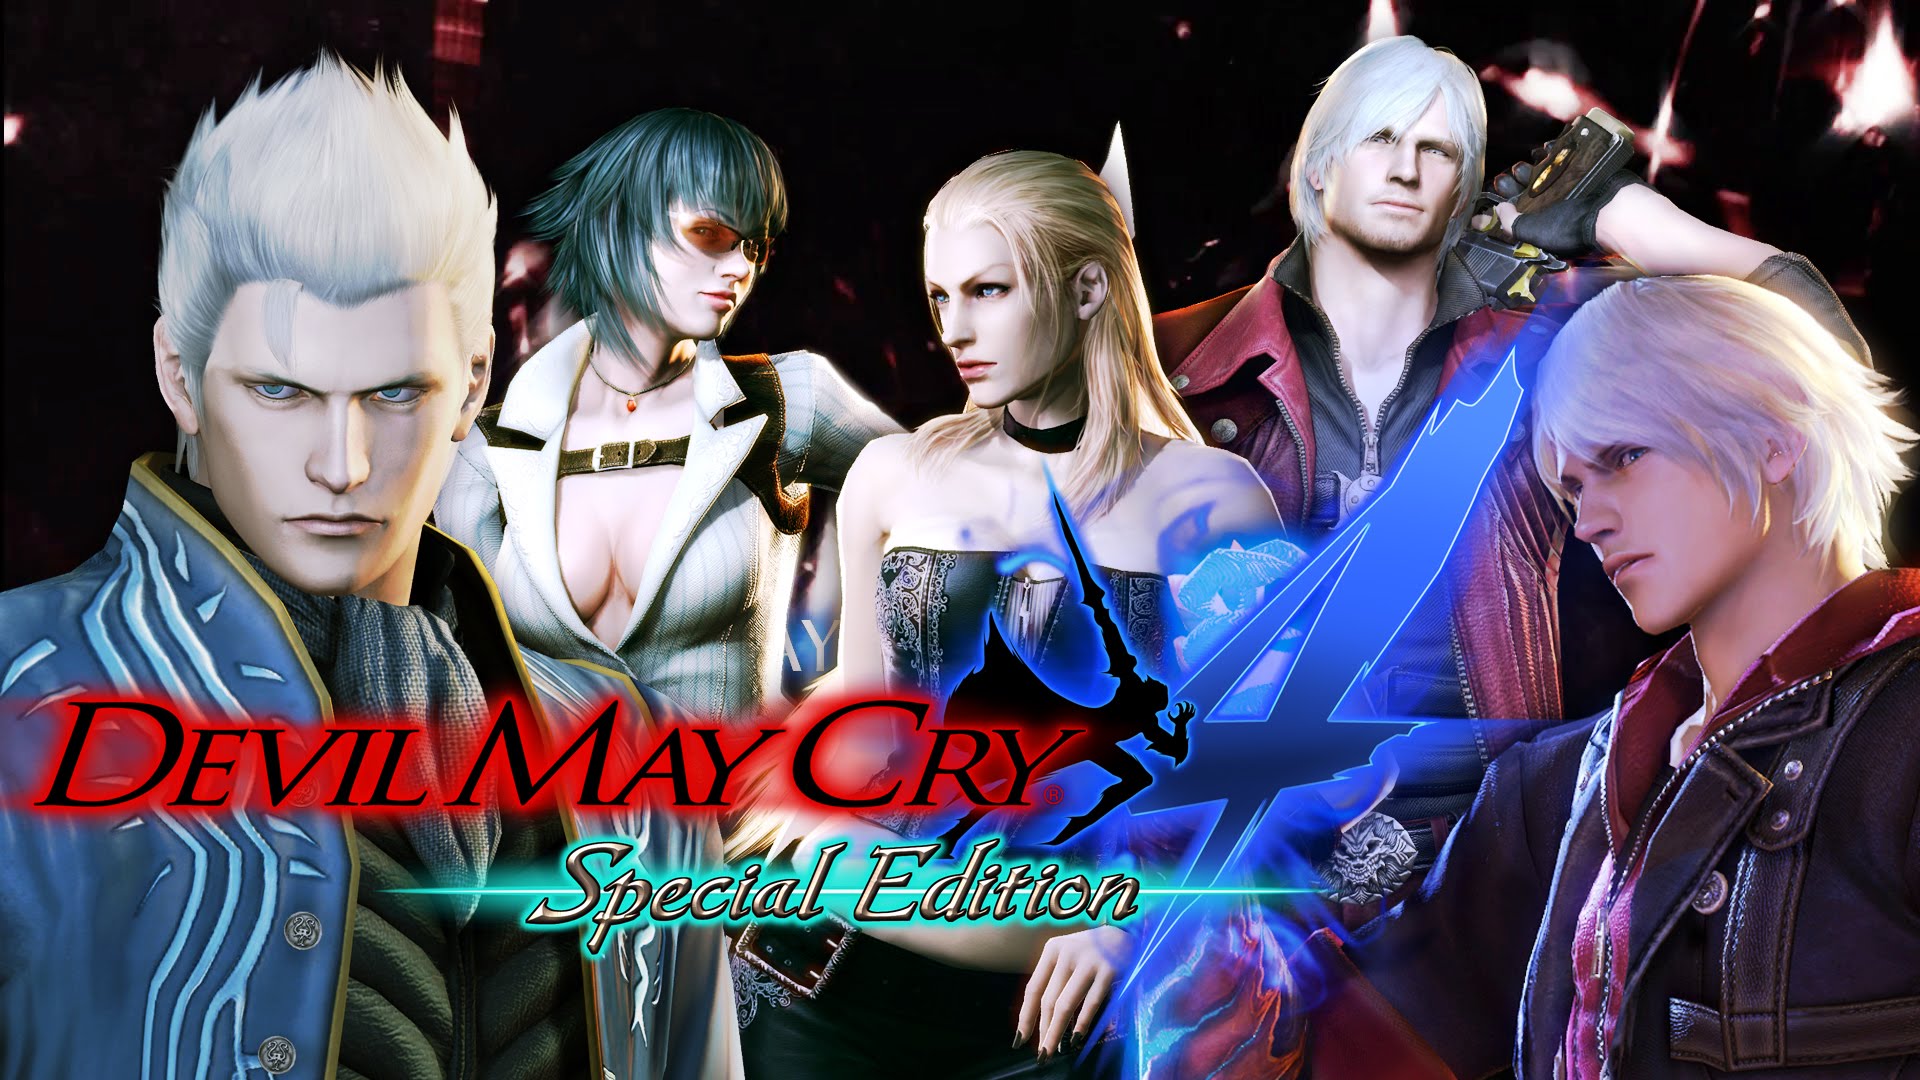 Devil May Cry 4 Pics, Video Game Collection